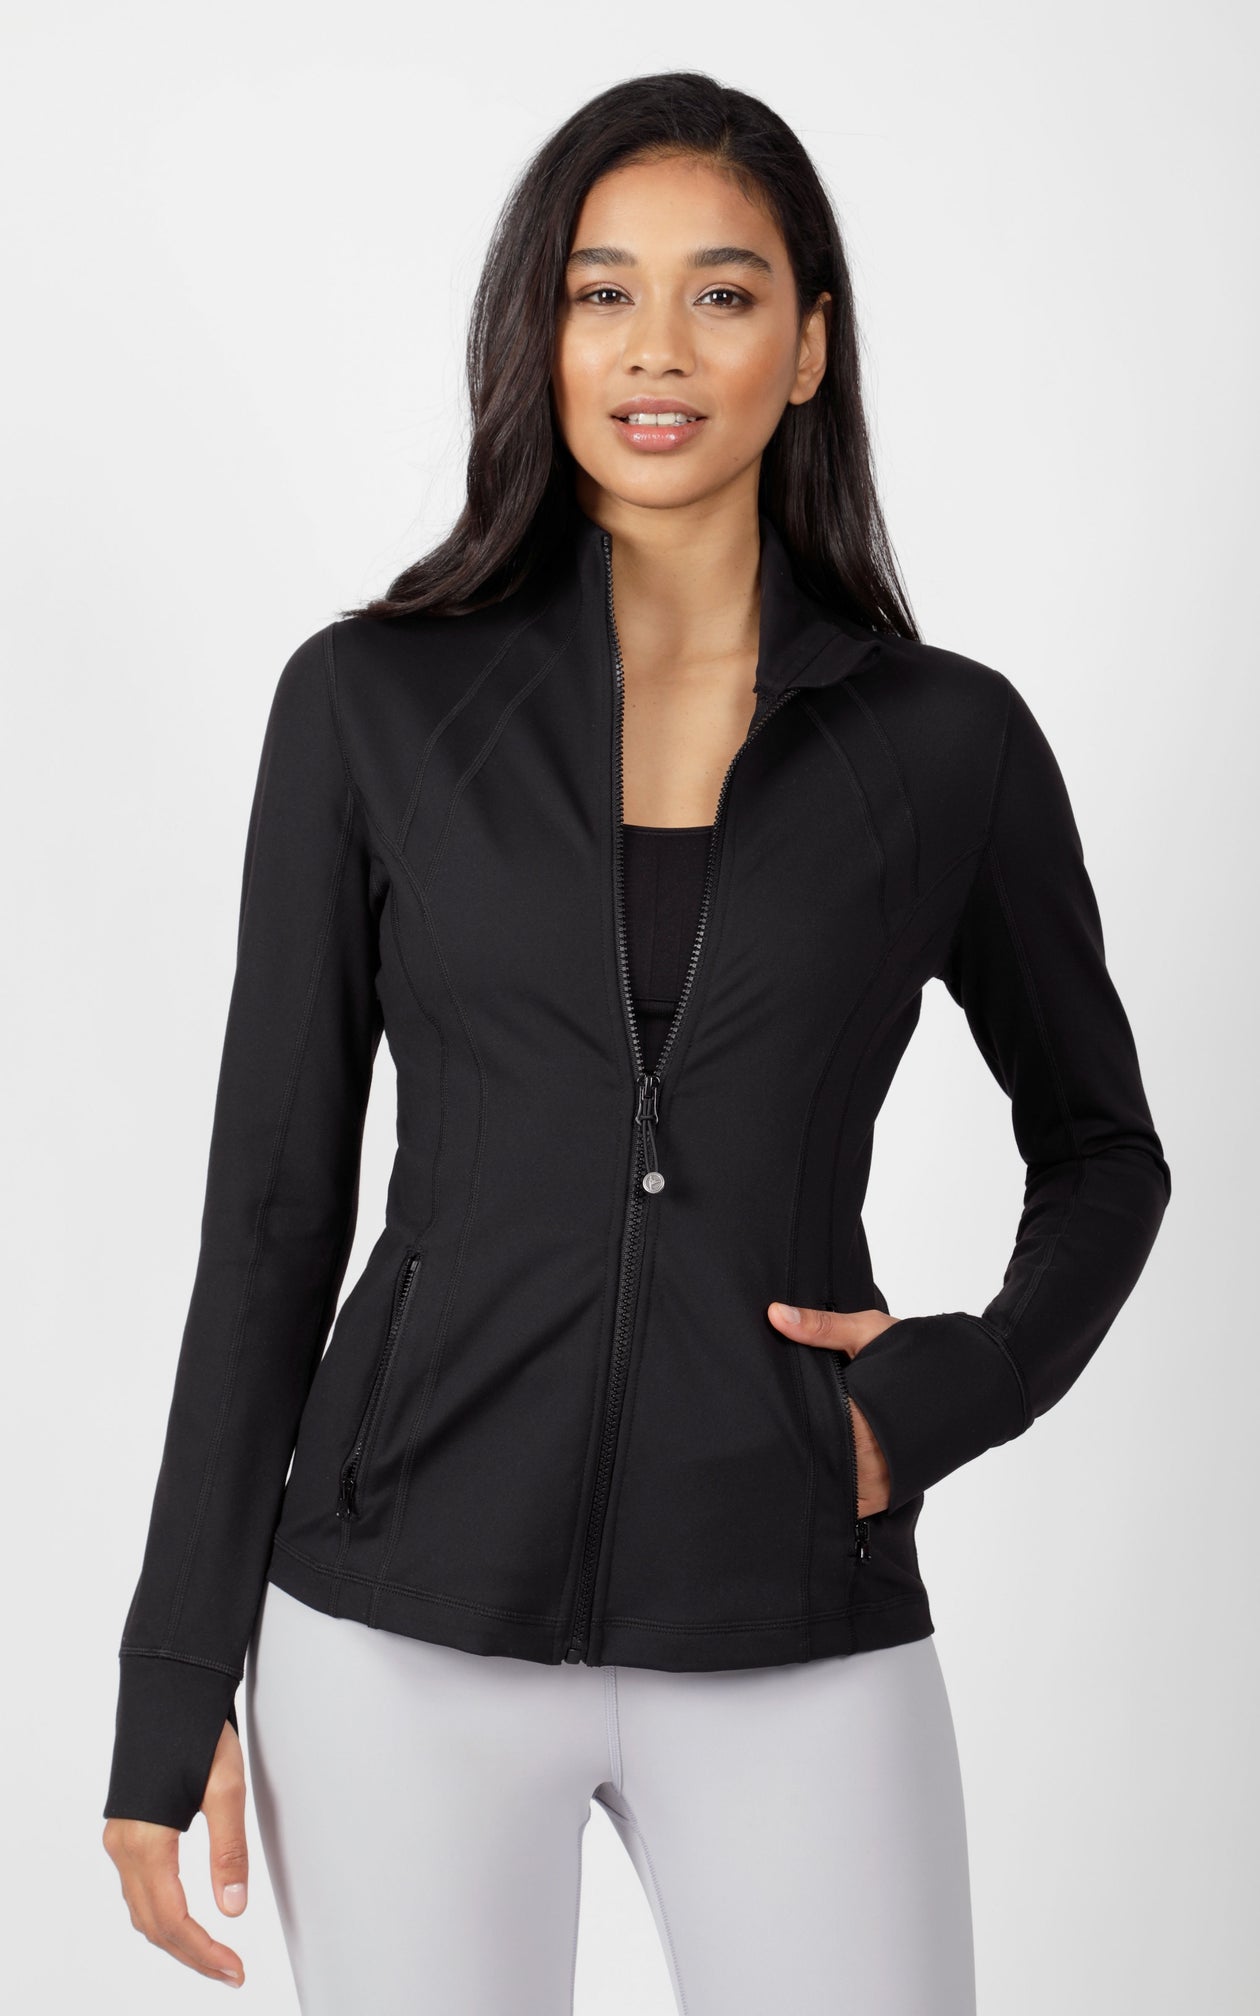 90 Degree by Reflex Womens Activewear Jackets in Womens Activewear 